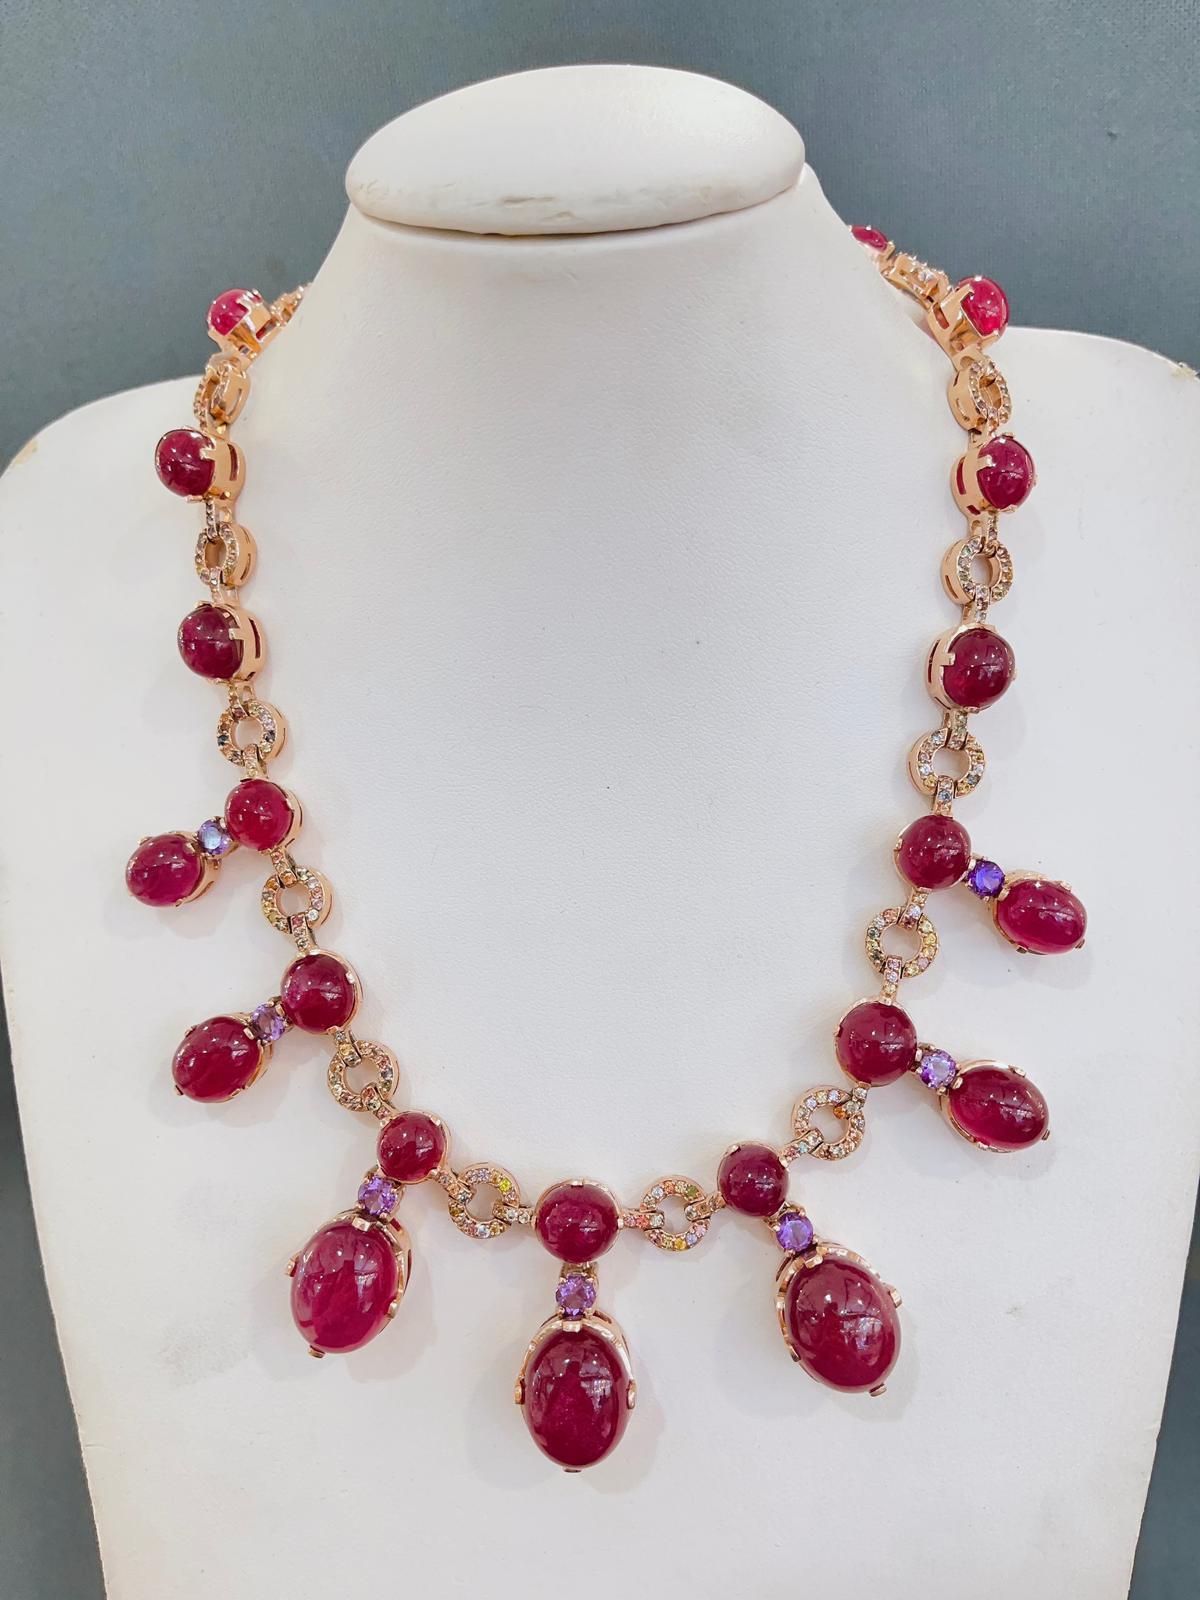 Bochic “Capri” Ruby, Amethyst & Sapphire Necklace Set In 22K Gold & Silver 
Bochic Multi Natural Gem “Capri” Stunning Necklace
It has an open and close clasp and a safety hook
The inside has a beautiful pattern grill 
Natural Red Ruby Cabochons - 56